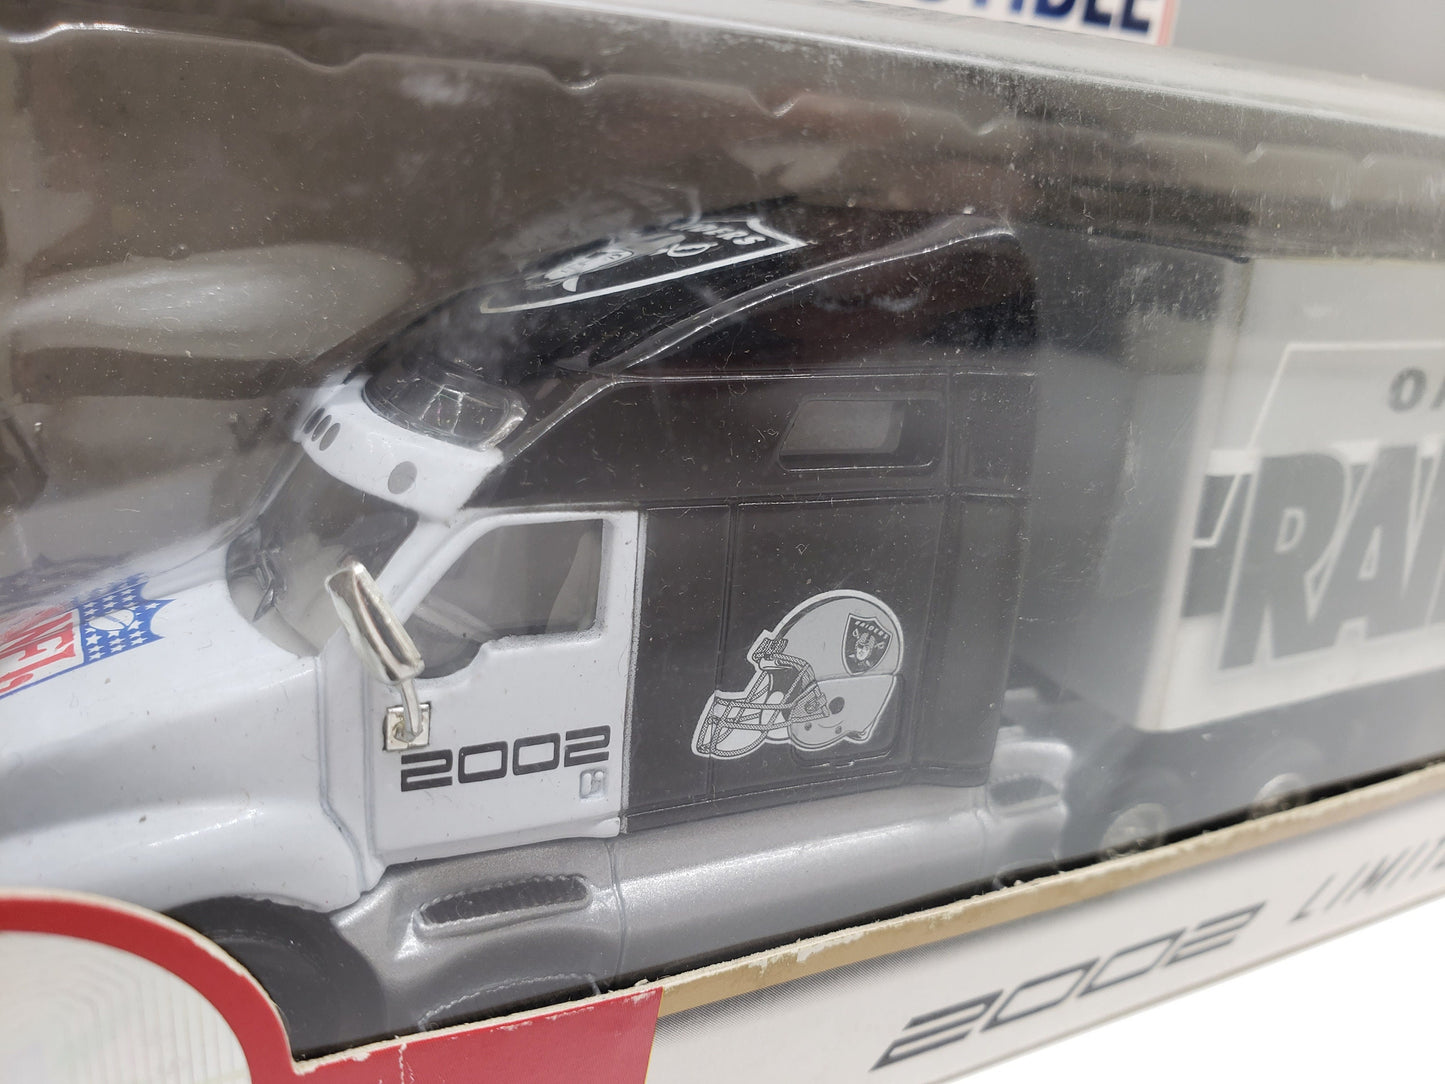 Tractor-Trailer Oakland Raiders Silver and Black Fleer Collectable Scale Miniature Model Toy Car Perfect Birthday Gift